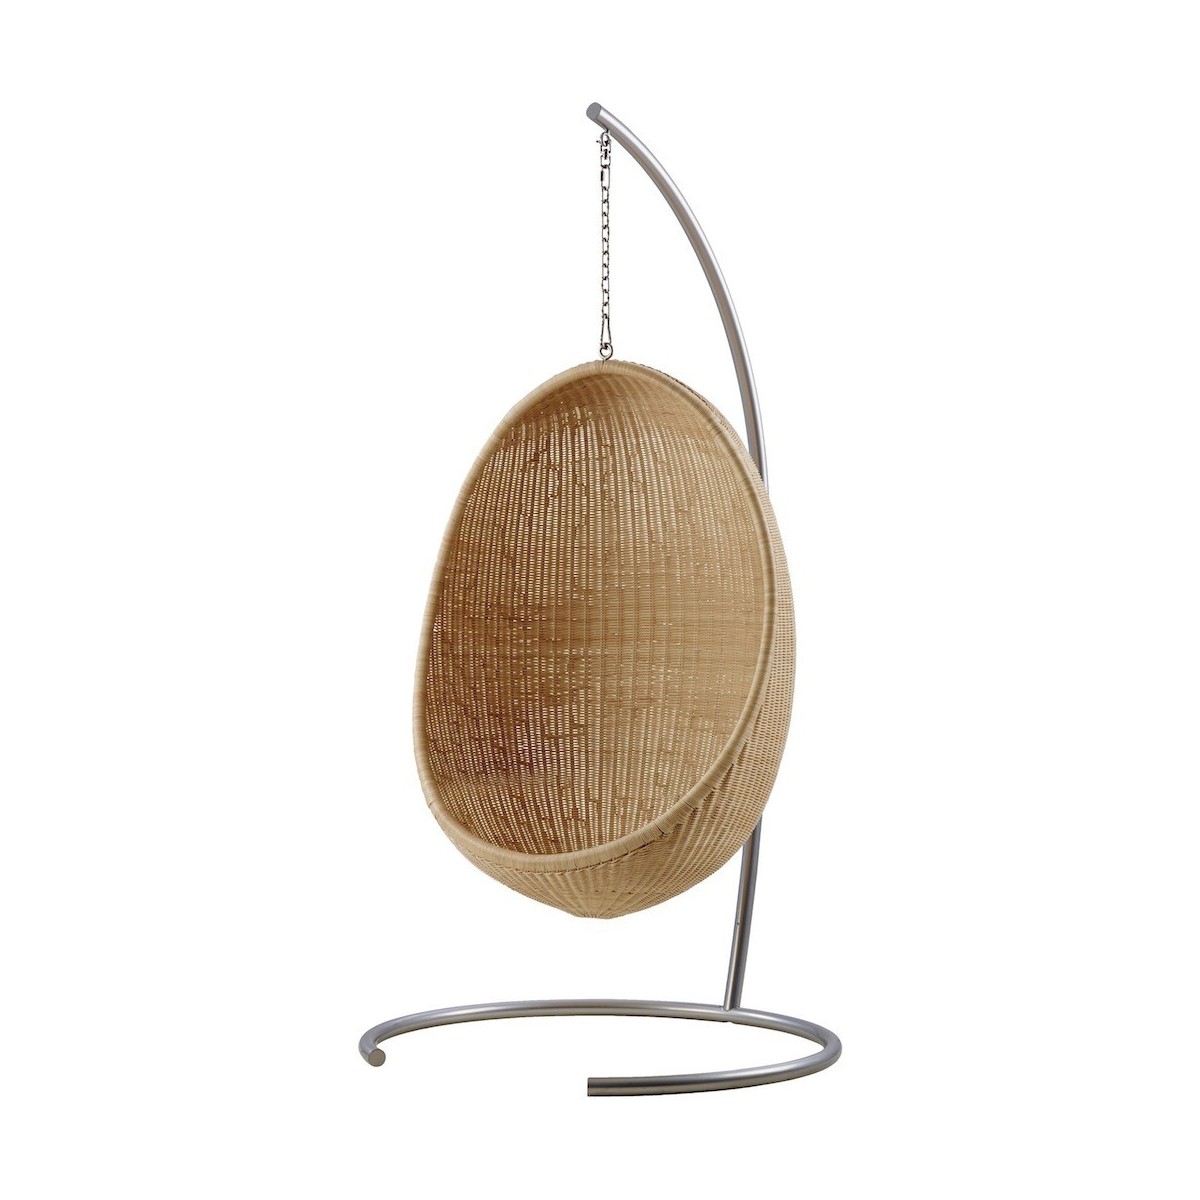 floor stand for hanging Egg chair - indoor version